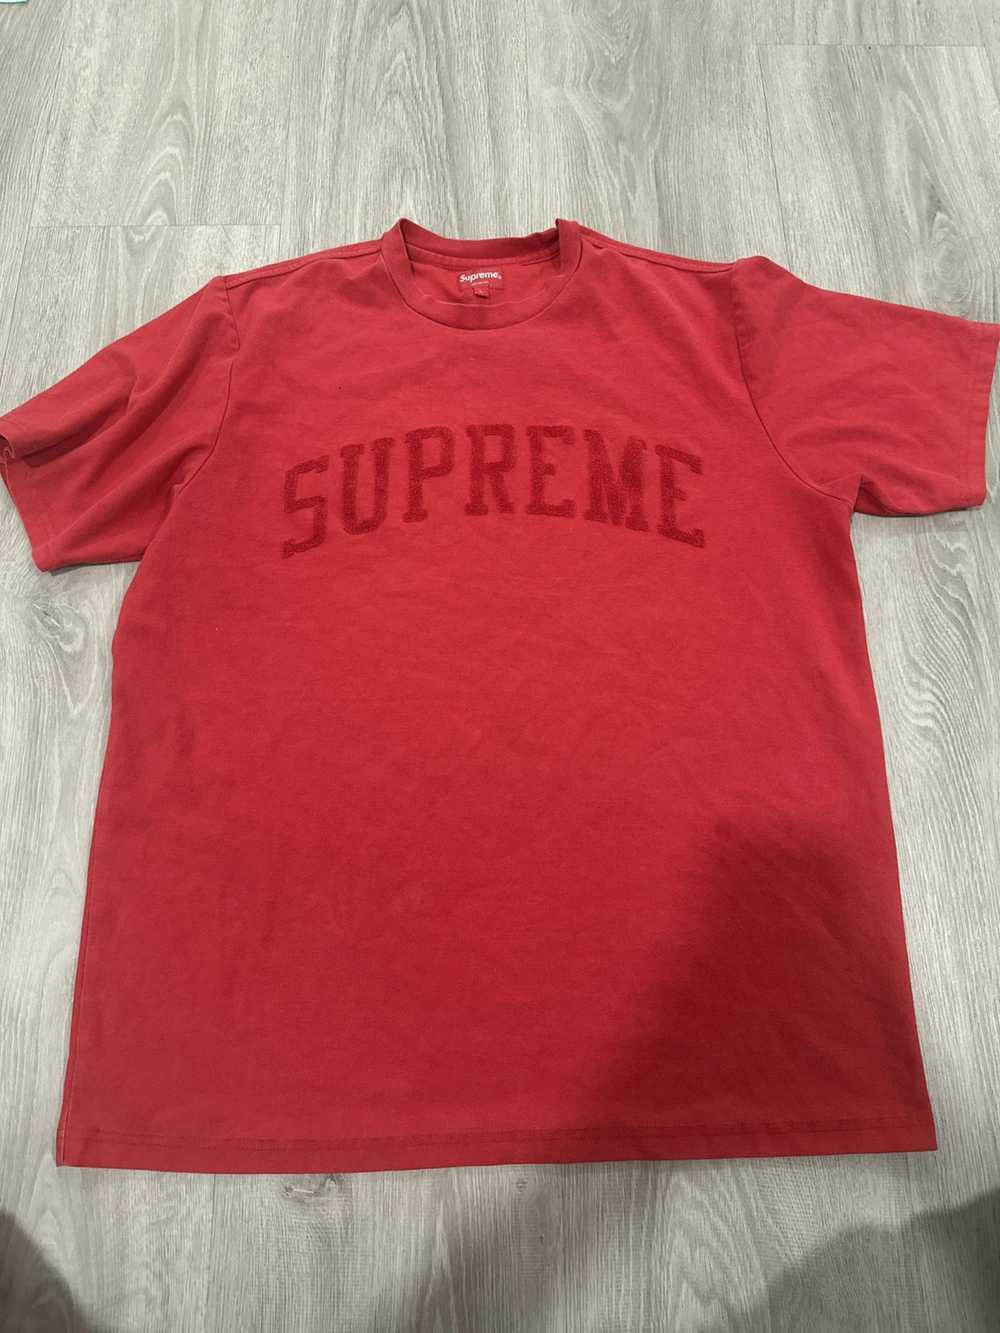 Supreme red supreme tee fuzzy letters (small grea… - image 1